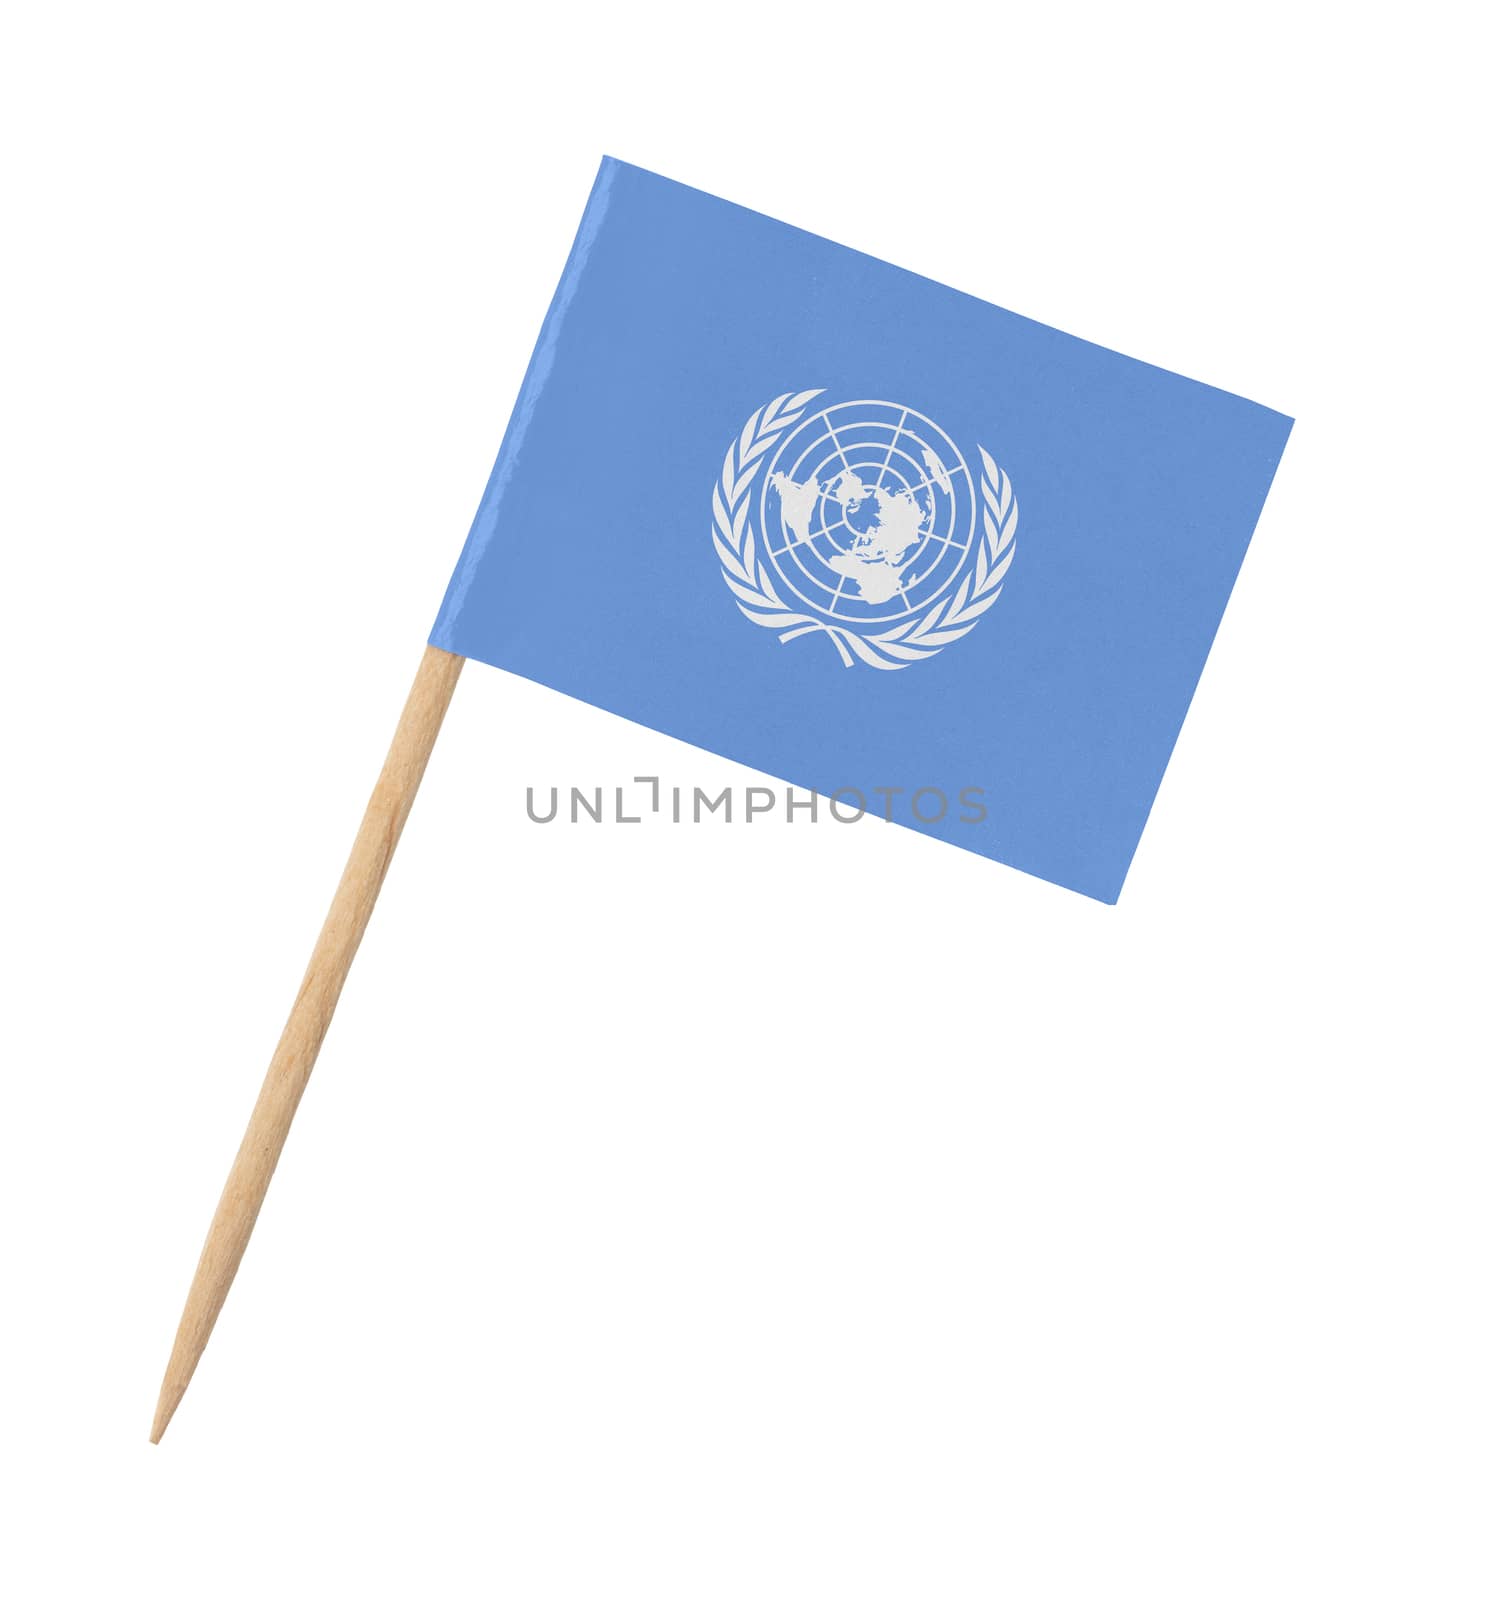 Small paper UN flag on wooden stick, isolated on white